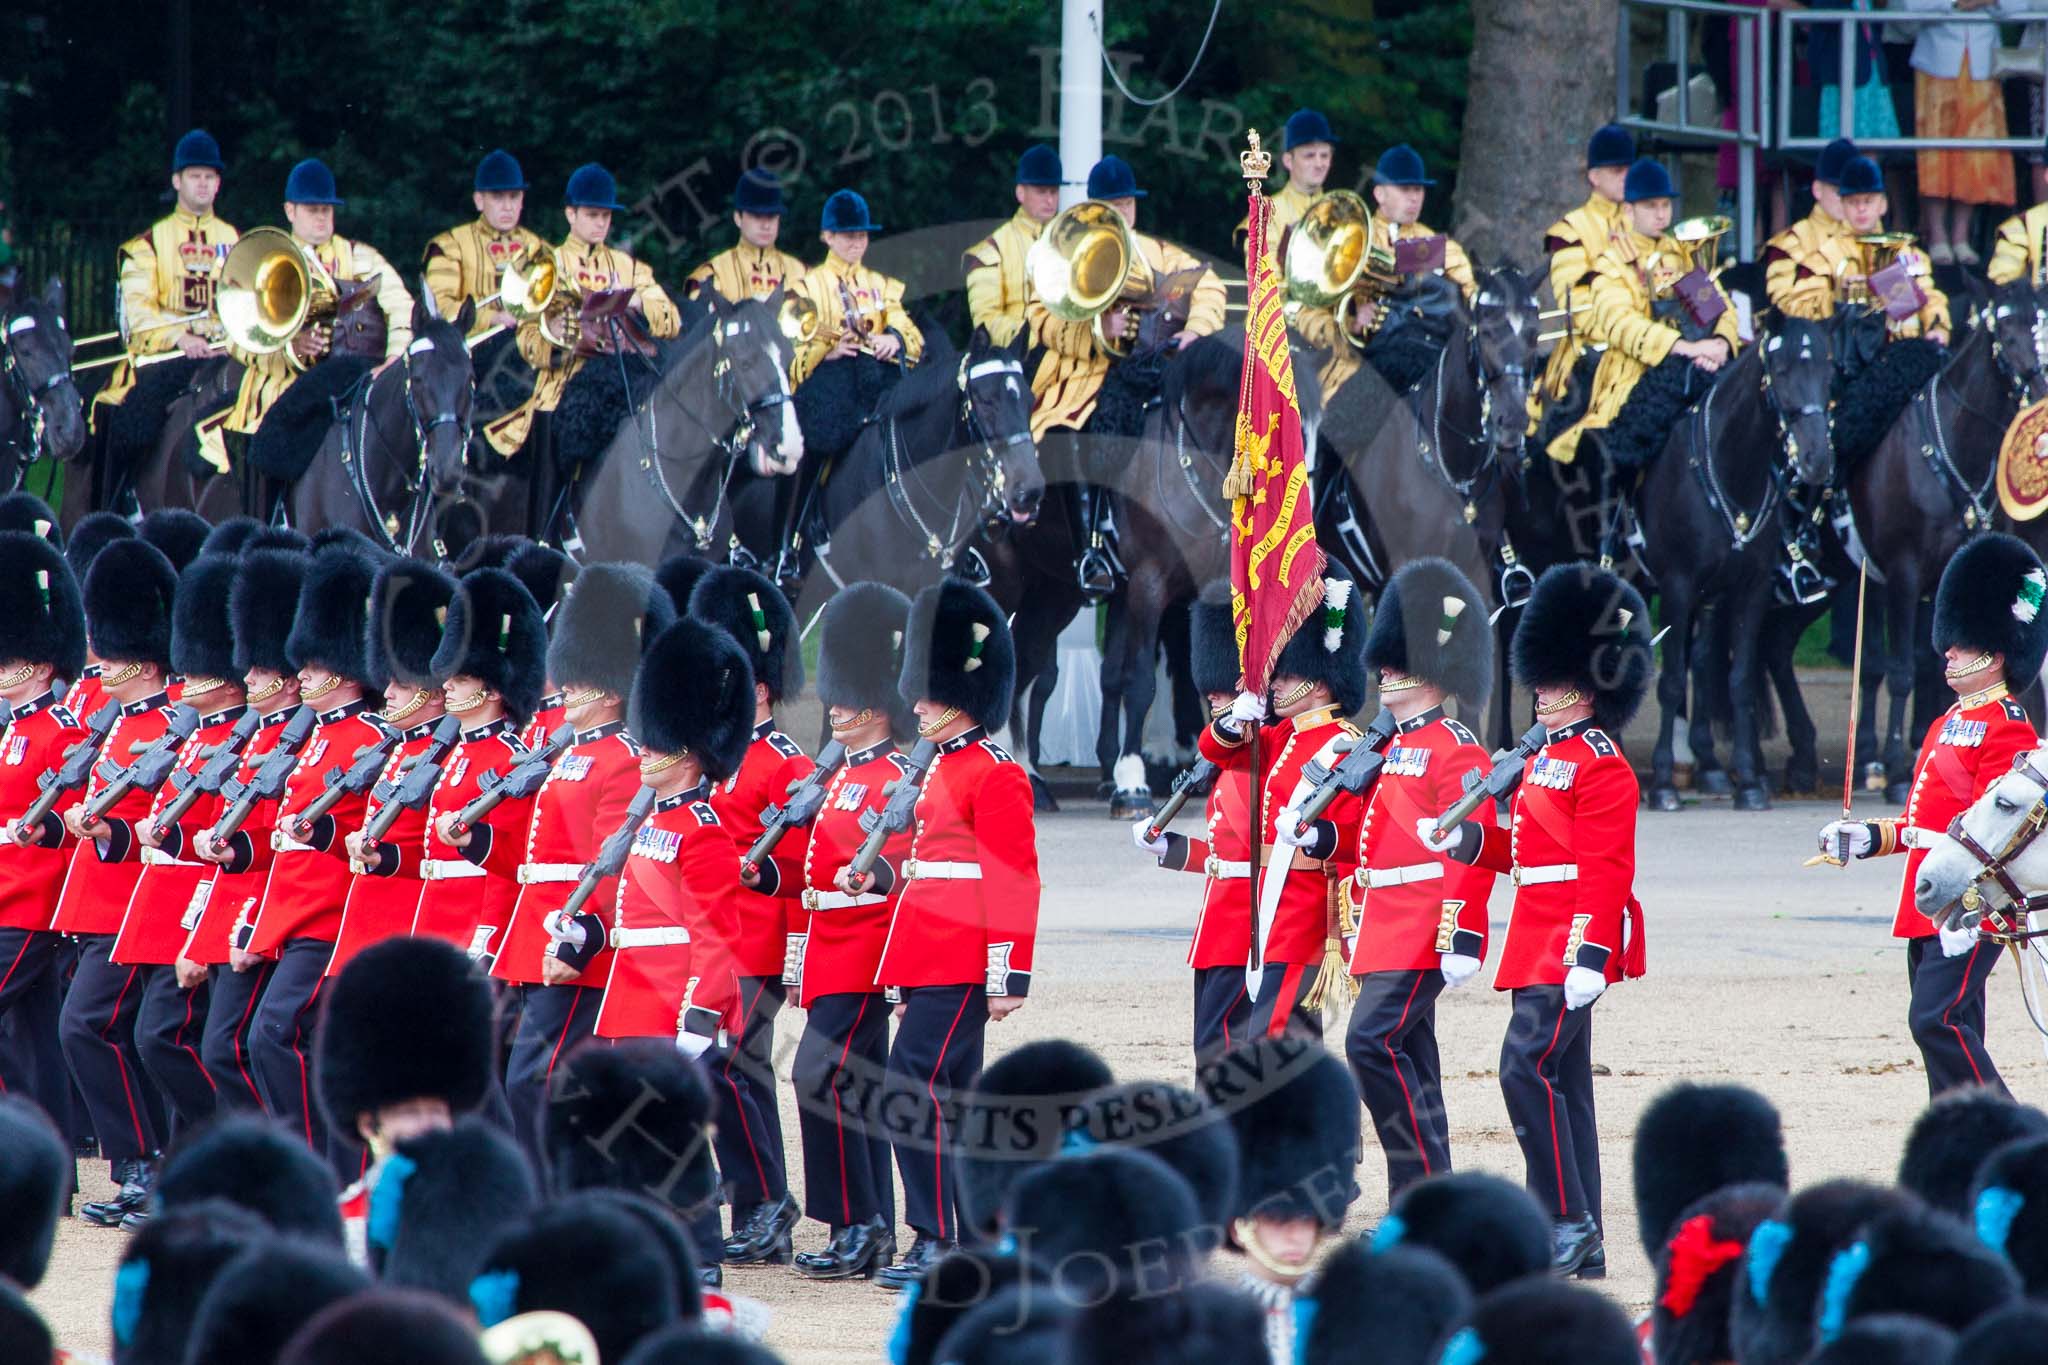 Trooping the Colour 2013: No. 1 Guard (Escort for the Colour),1st Battalion Welsh Guards, at the beginning of the March Past in Quick Time. Behind them the Mounted Bands of the Household Cavalry. Image #578, 15 June 2013 11:42 Horse Guards Parade, London, UK